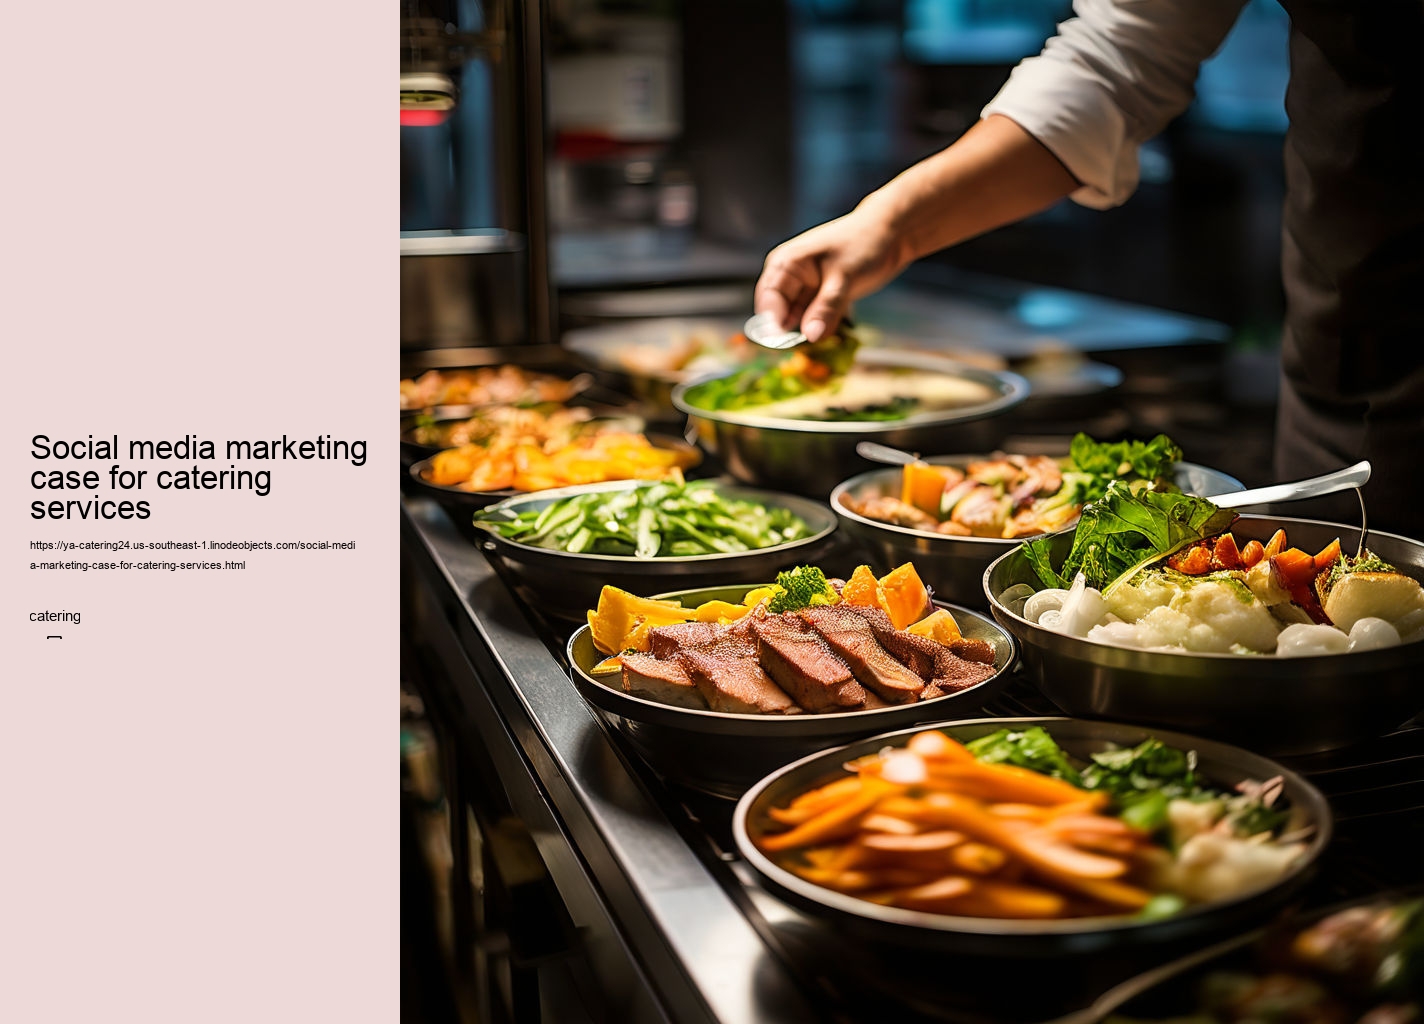 Social media marketing case for catering services